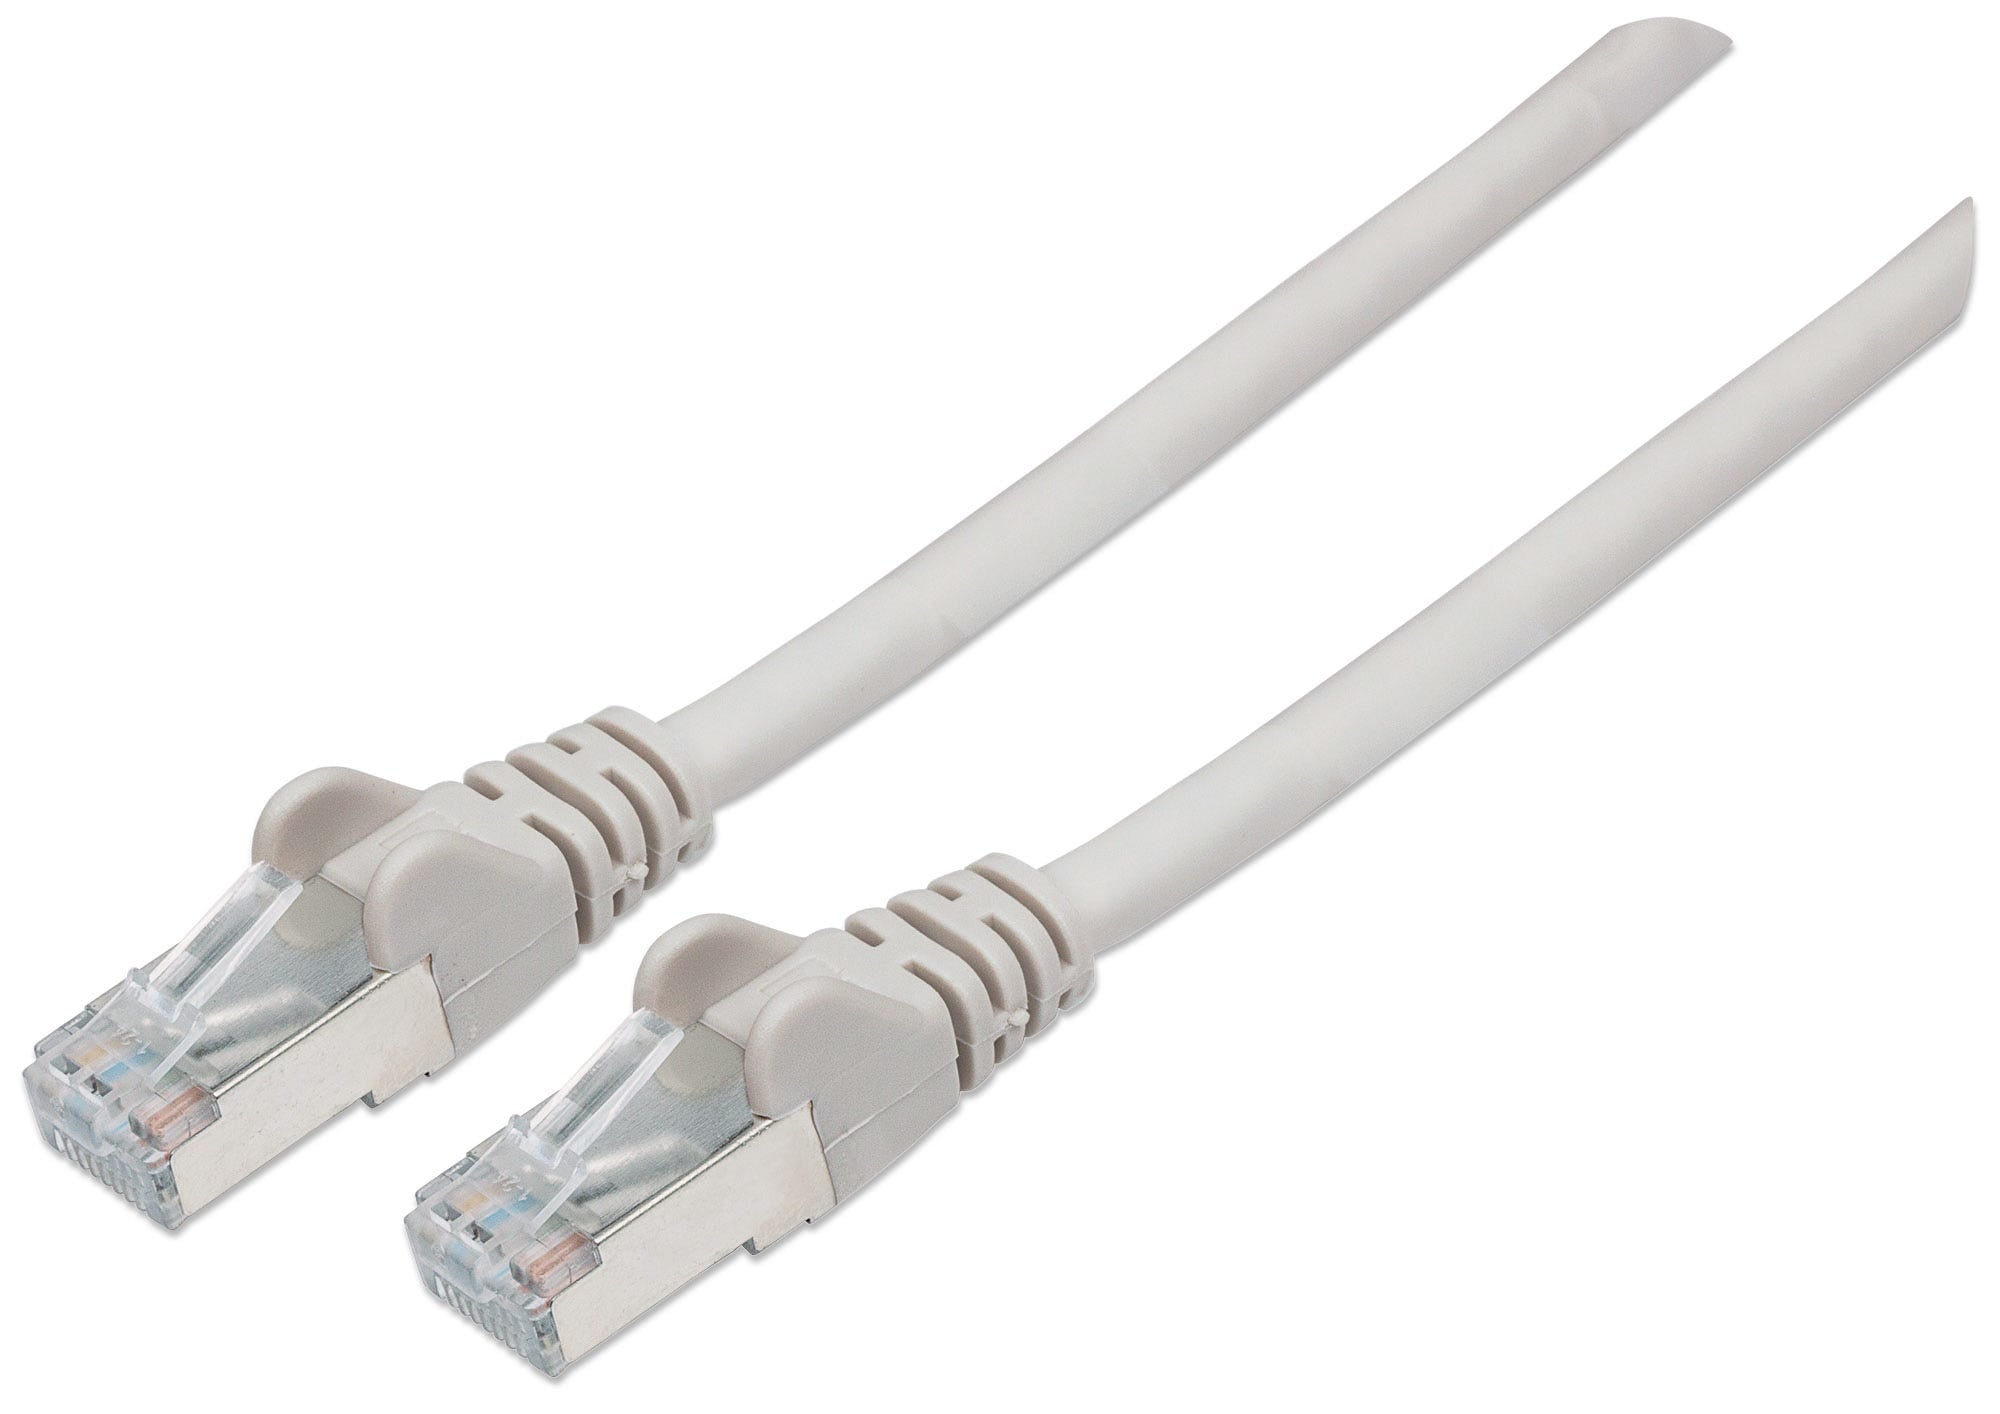 Intellinet Network Patch Cable, Cat6A, 1m, Grey, Copper, S/FTP, LSOH / LSZH, PVC, RJ45, Gold Plated Contacts, Snagless, Booted, Lifetime Warranty, Polybag